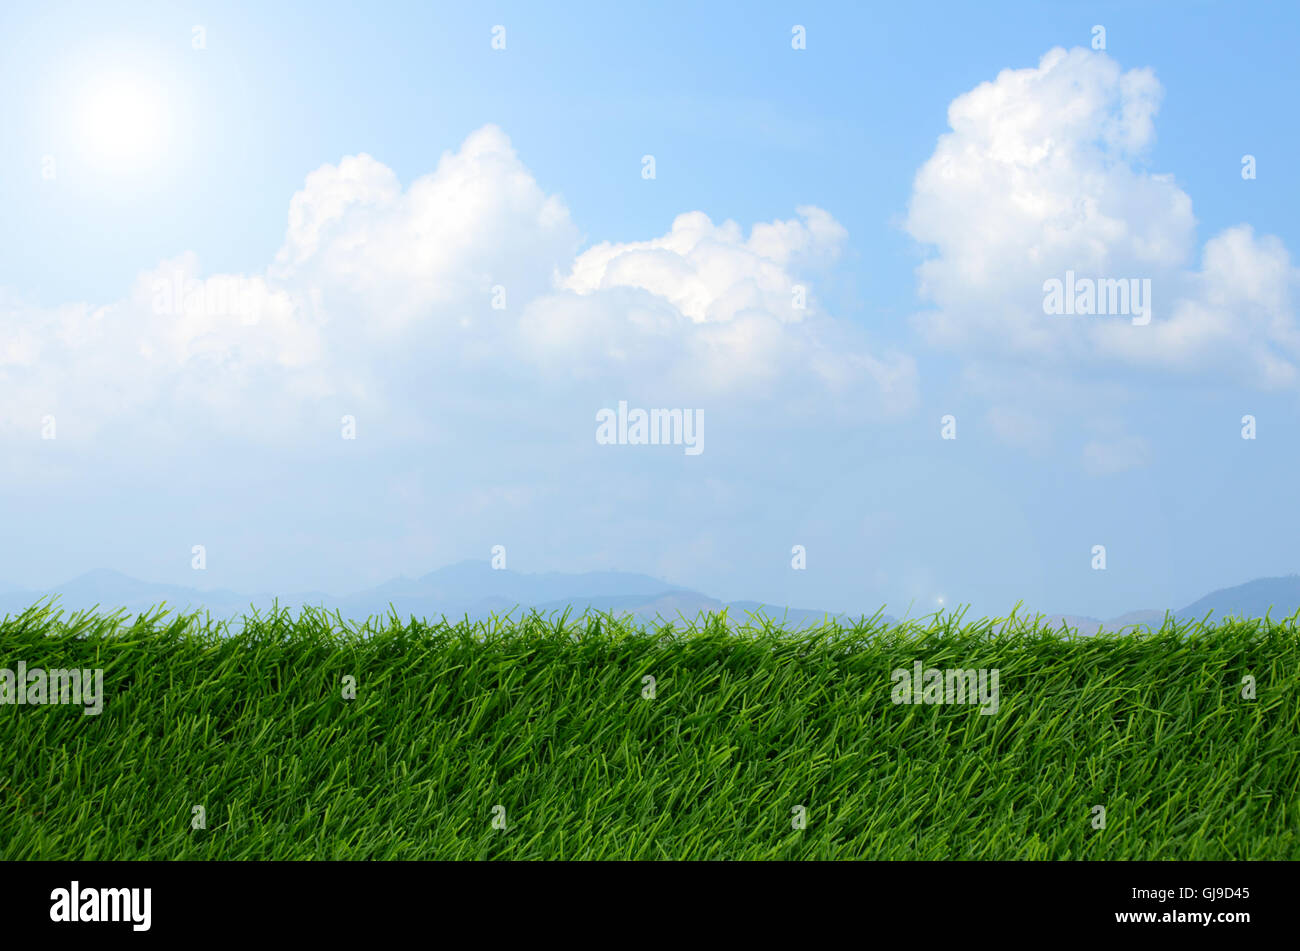 Soccer field with bright sky. Stock Photo